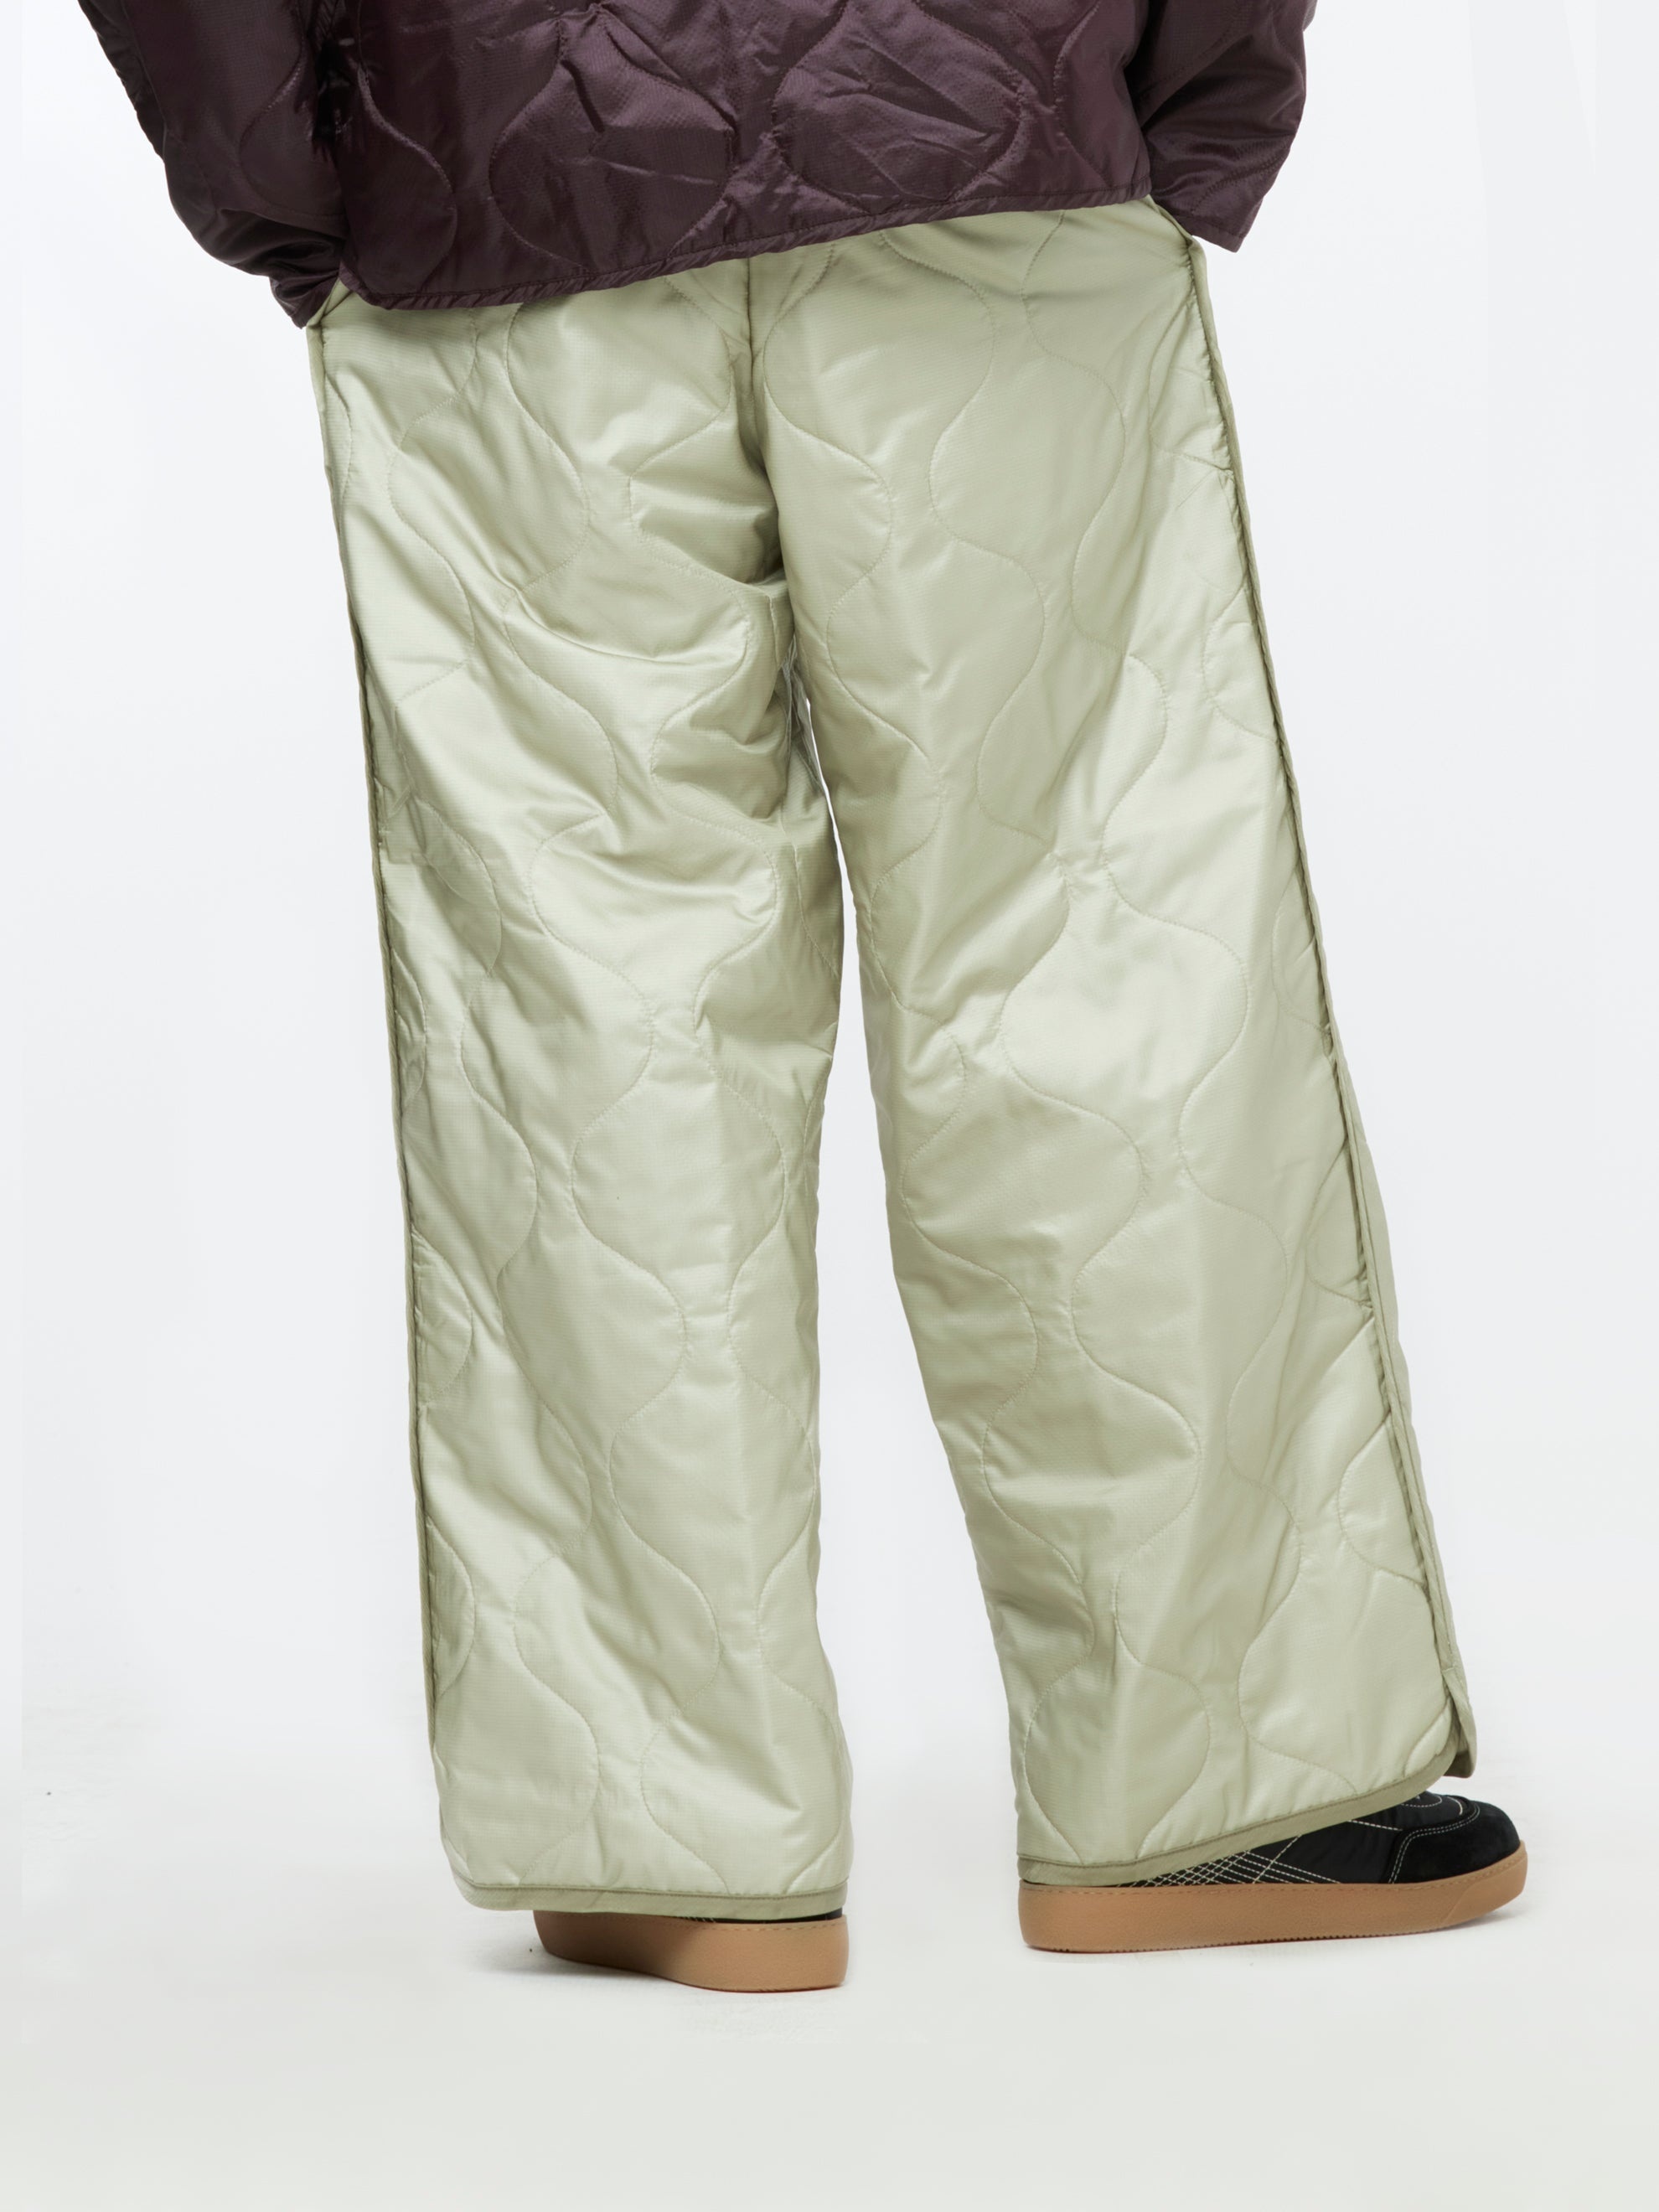 PANSBOURG RIPSPORT PANTS (SAND) - 4